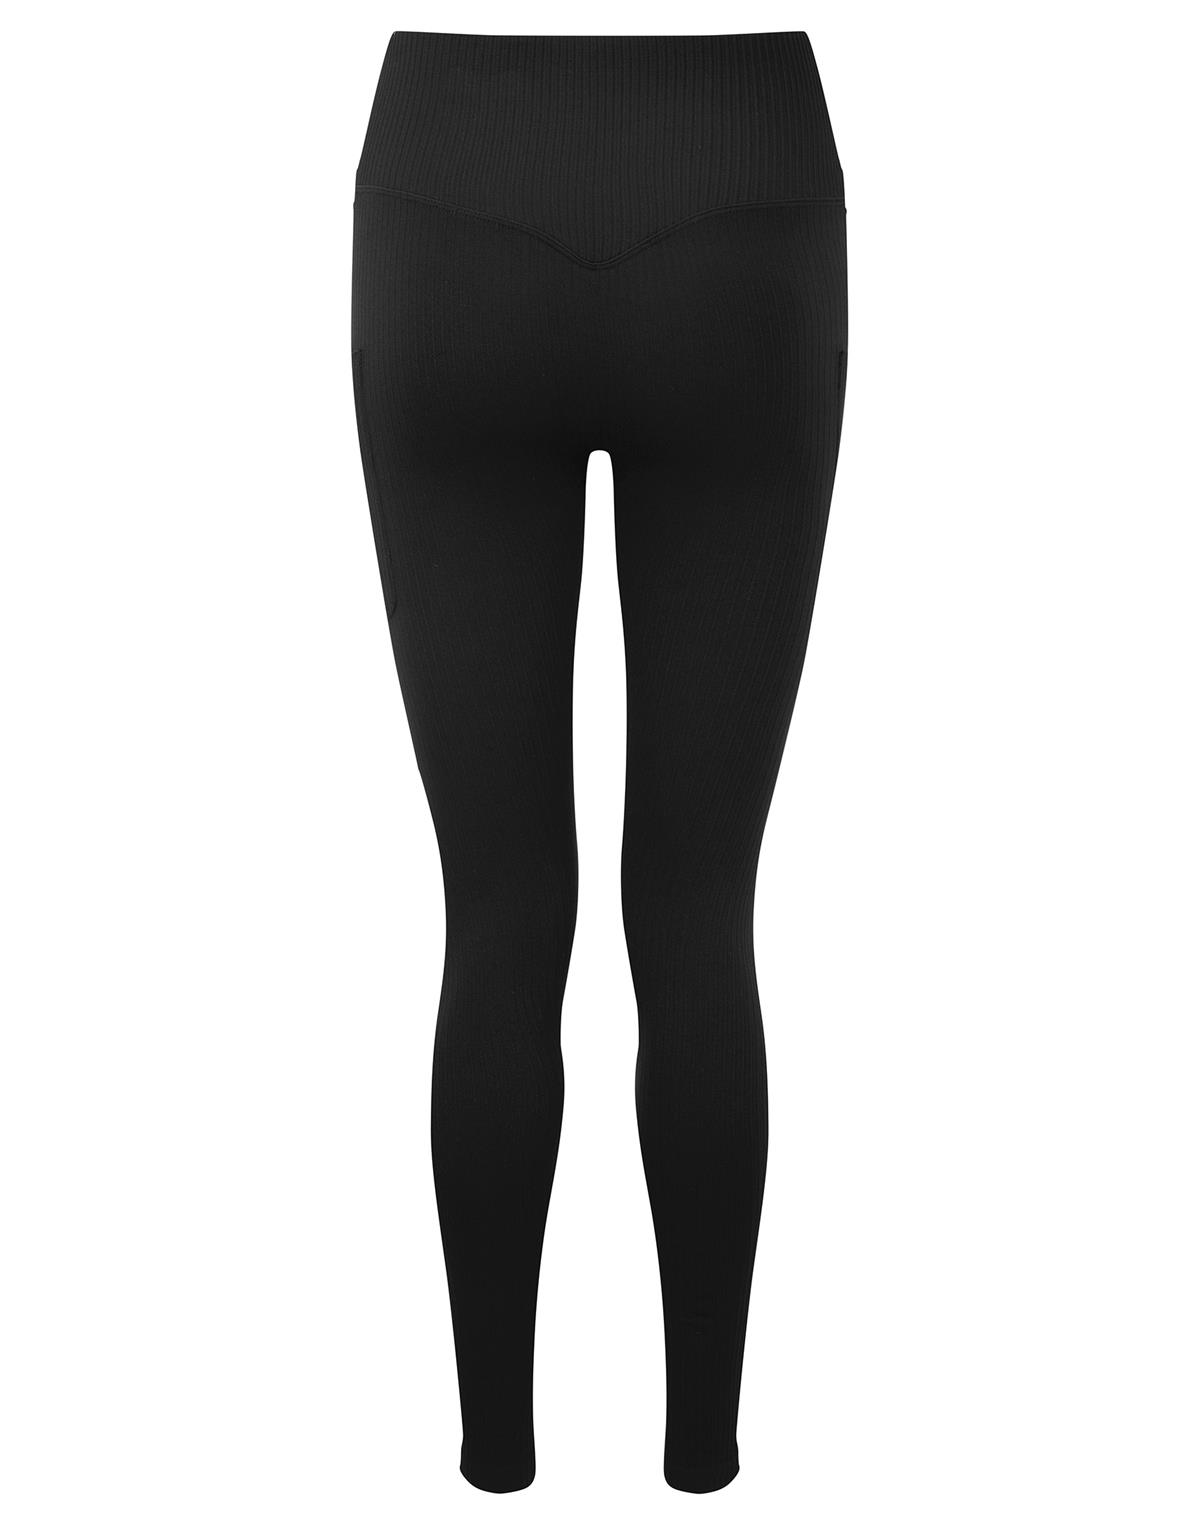 Women's High-Rise Ribbed Jogger Pants 25.5 - All in Motion Black M 1 ct